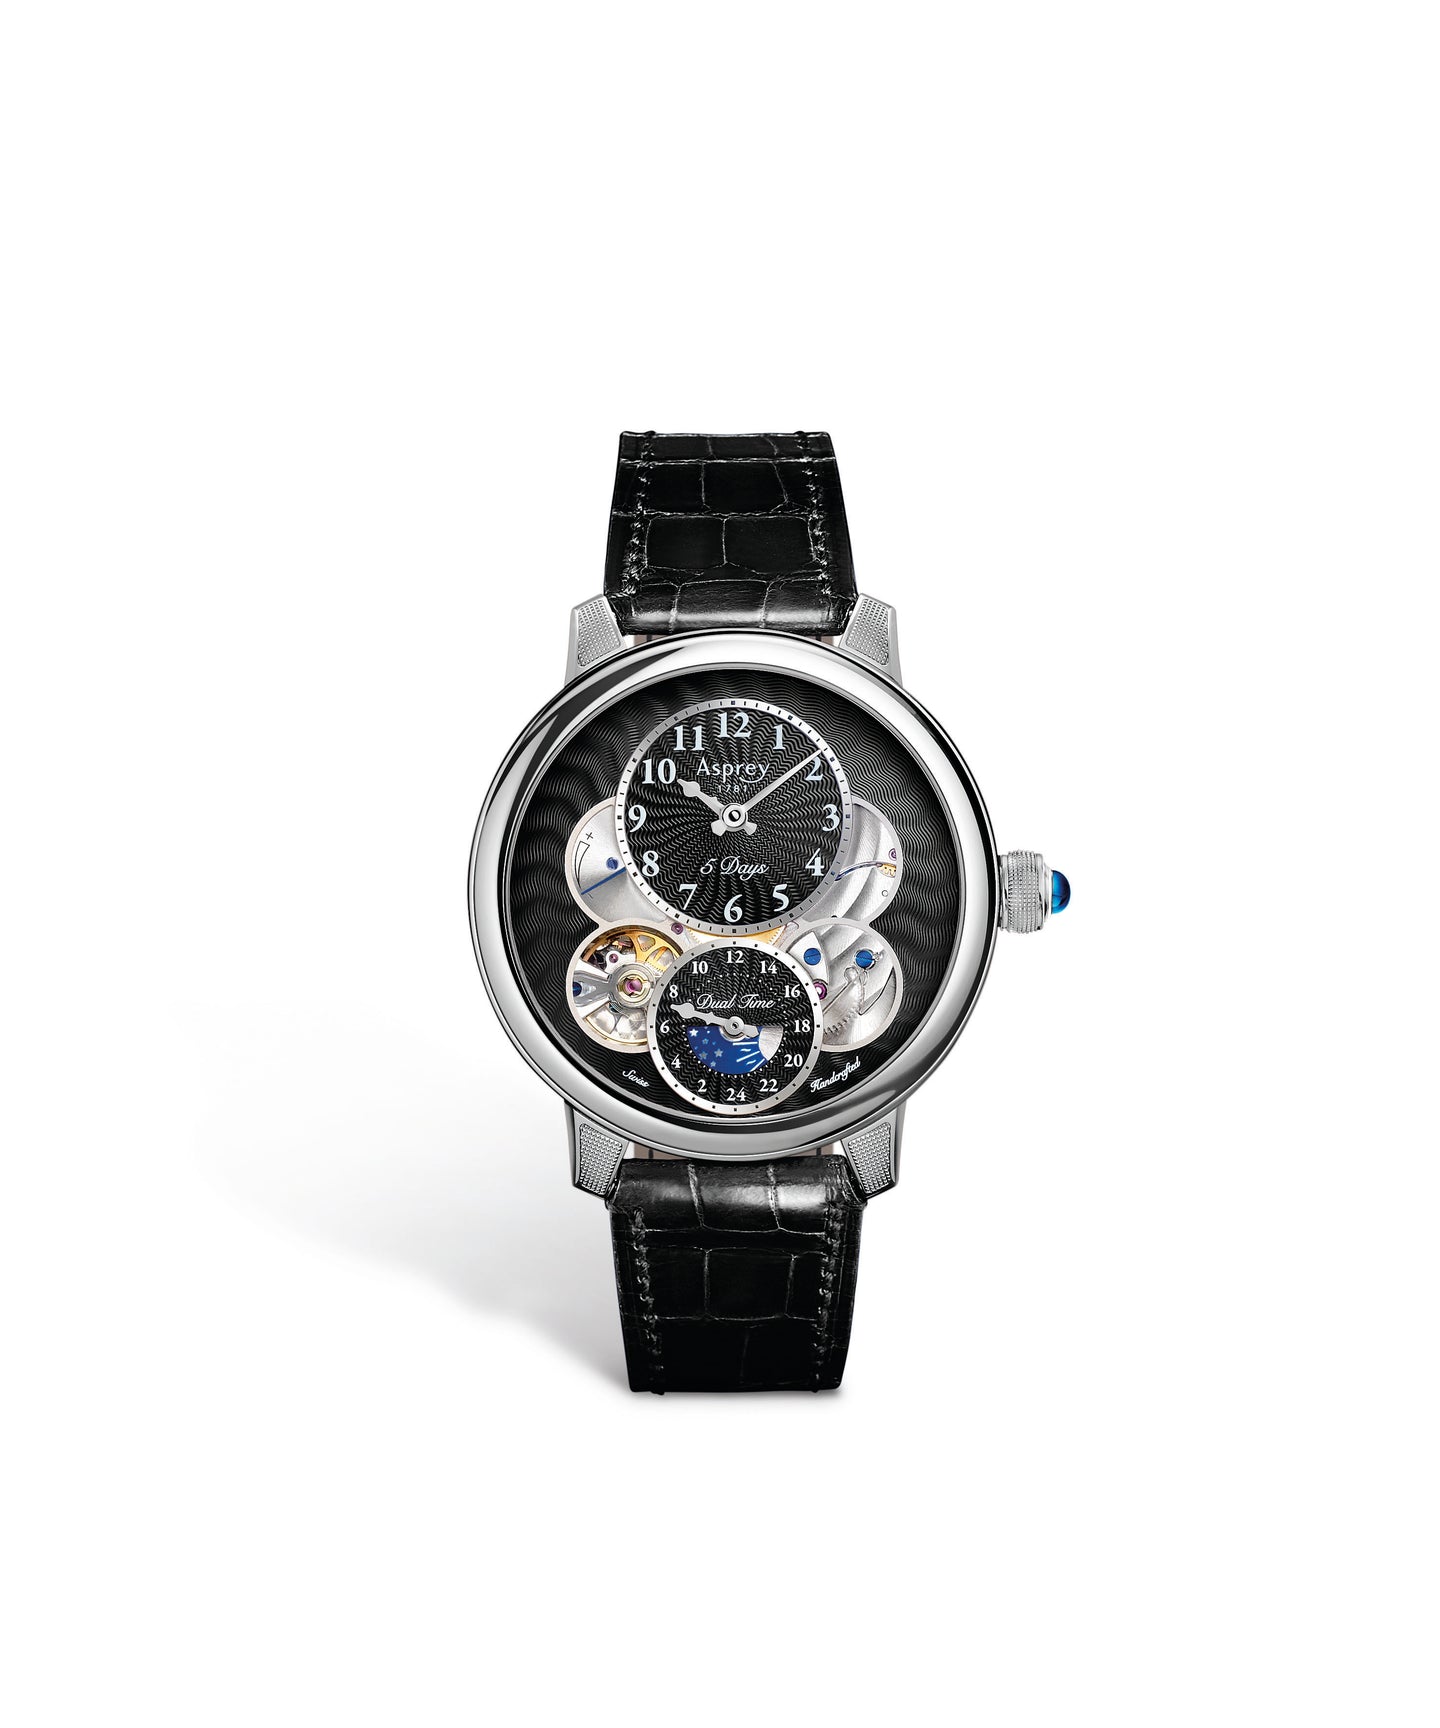 The Entheus R2 42mm watch in 18ct White gold